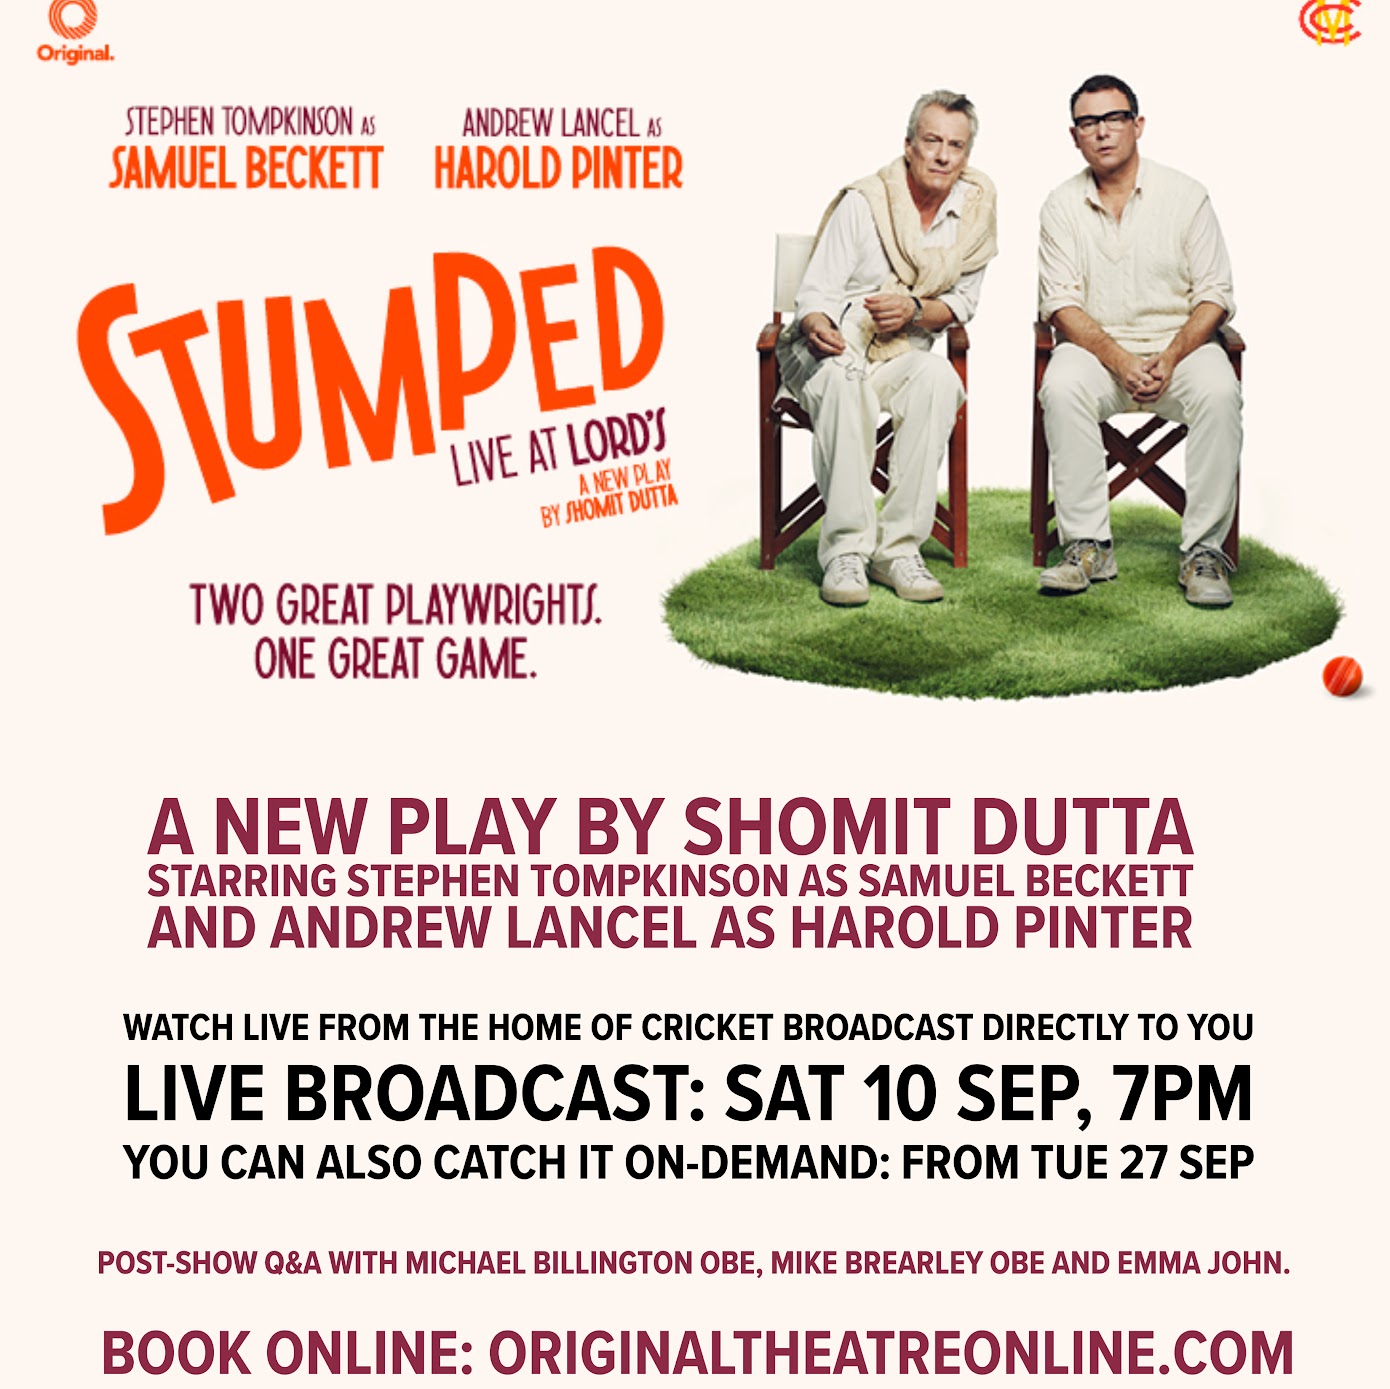 Beckett and Pinter talk cricket in a new online play